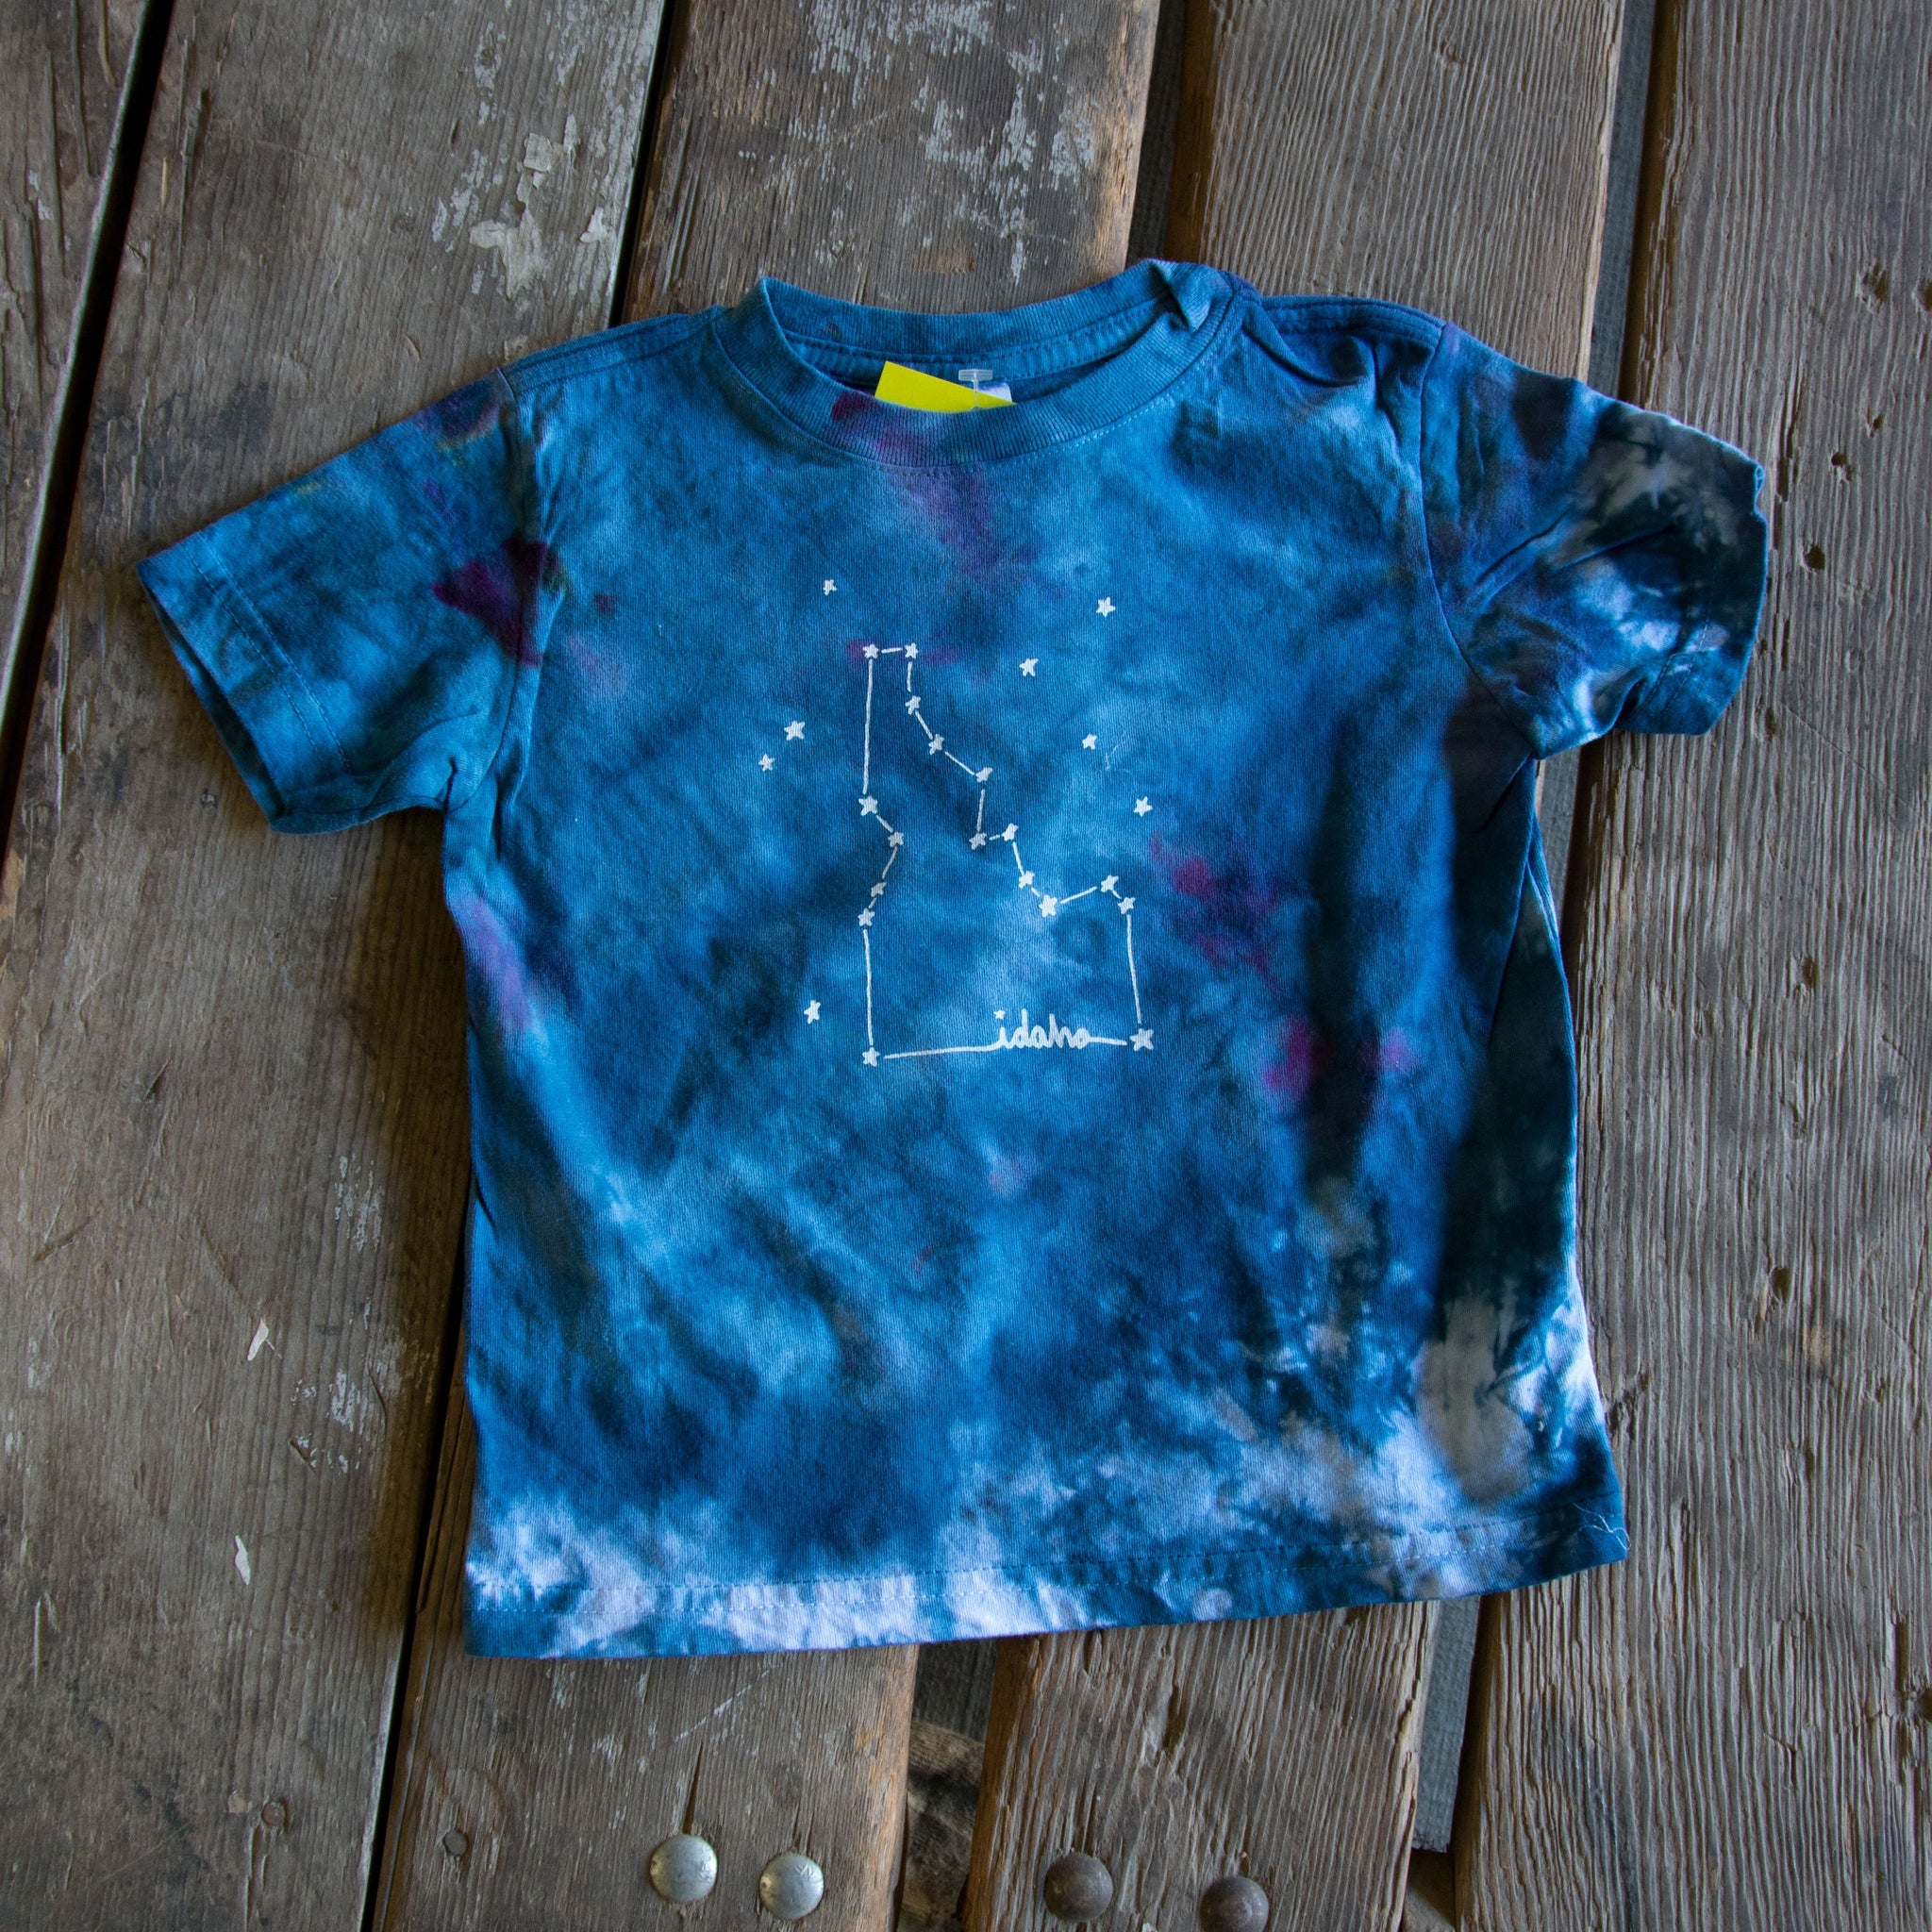 Toddler Ice Dyed Idaho Constellation T-shirt, eco-friendly waterbased inks, toddler sizes